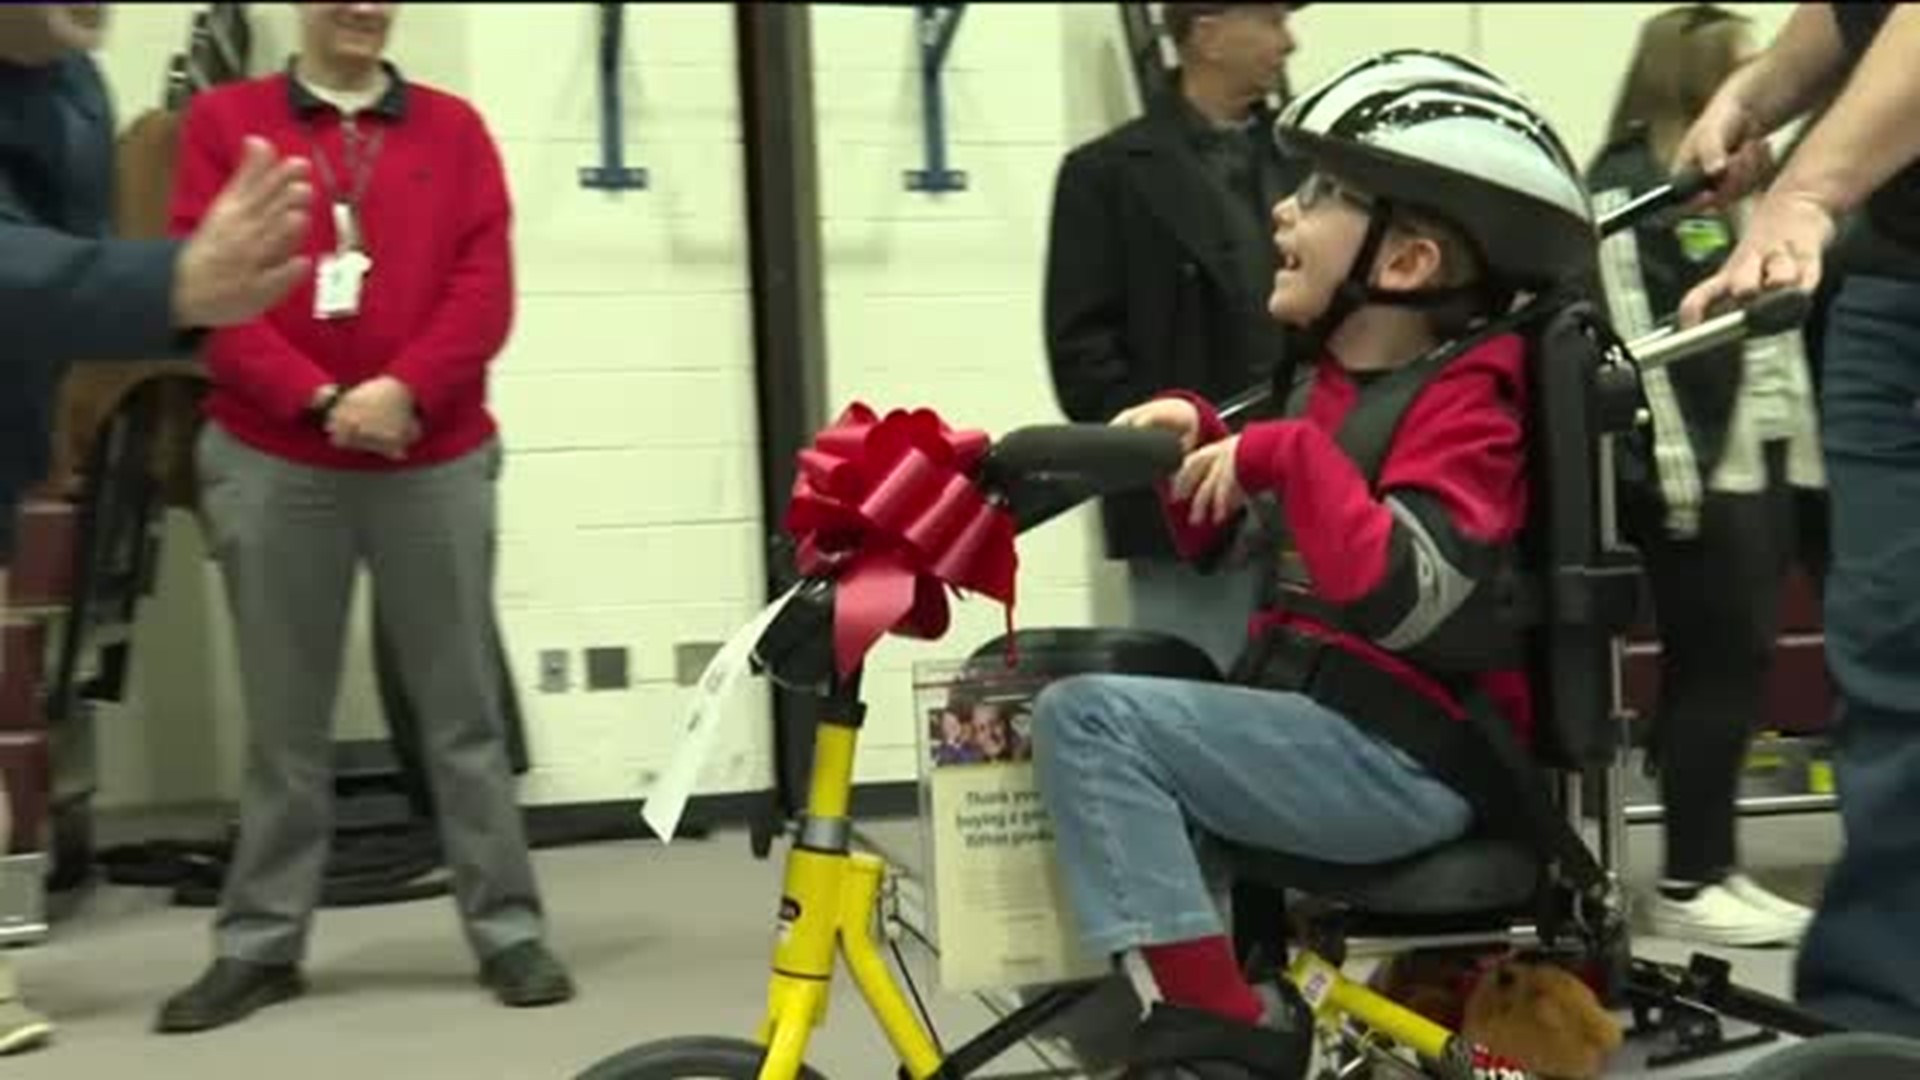 Students with Disabilities Get Life-changing Equipment